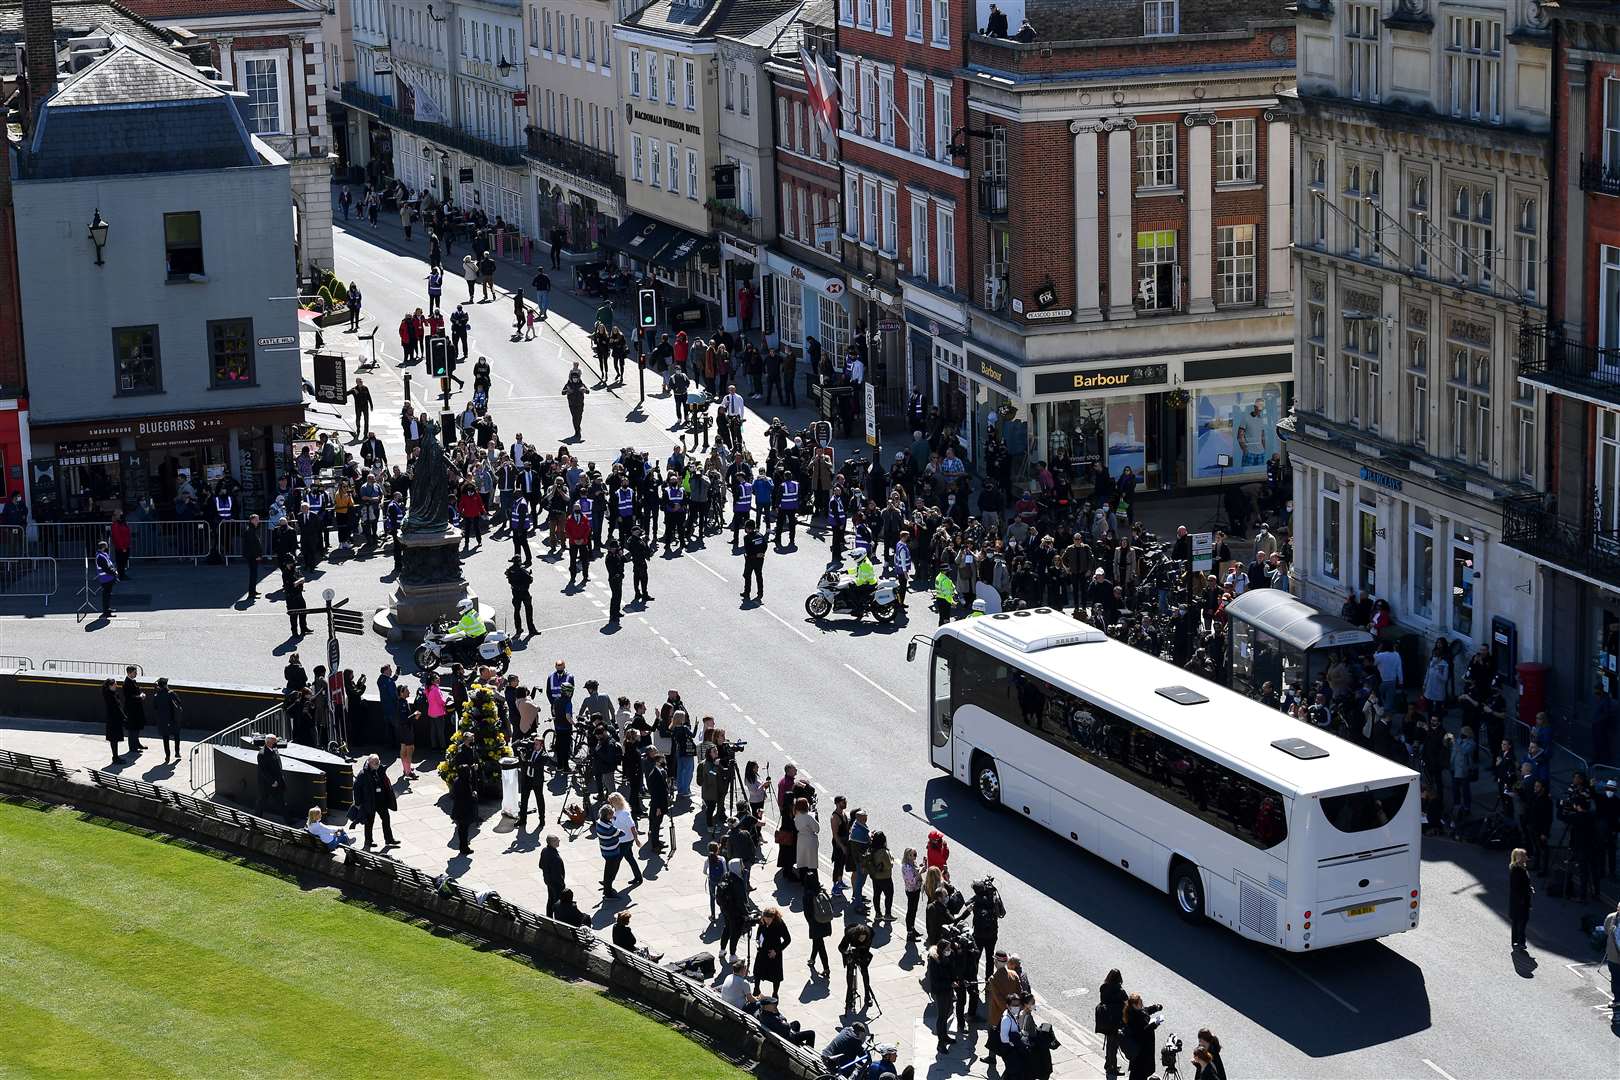 Police hold back the crowds as a coach arrives outside St George’s Chapel (Justin Tallis/PA)